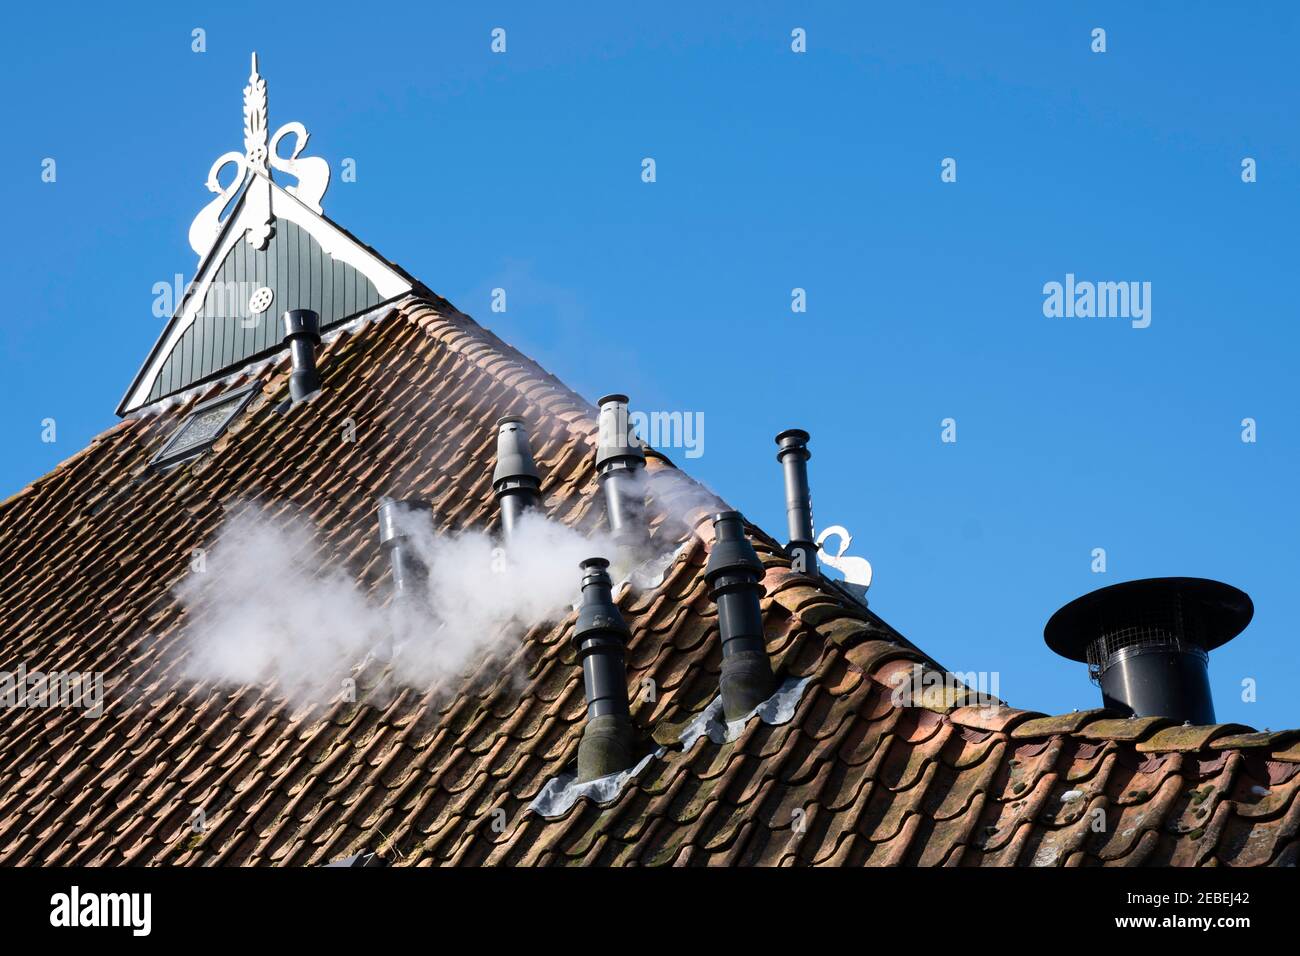 Roof of a Frisian farm with many chimneys and typical wooden triangular so-called 'Uilenbord' in the ridge with a mute swan on either side. Blue sky Stock Photo